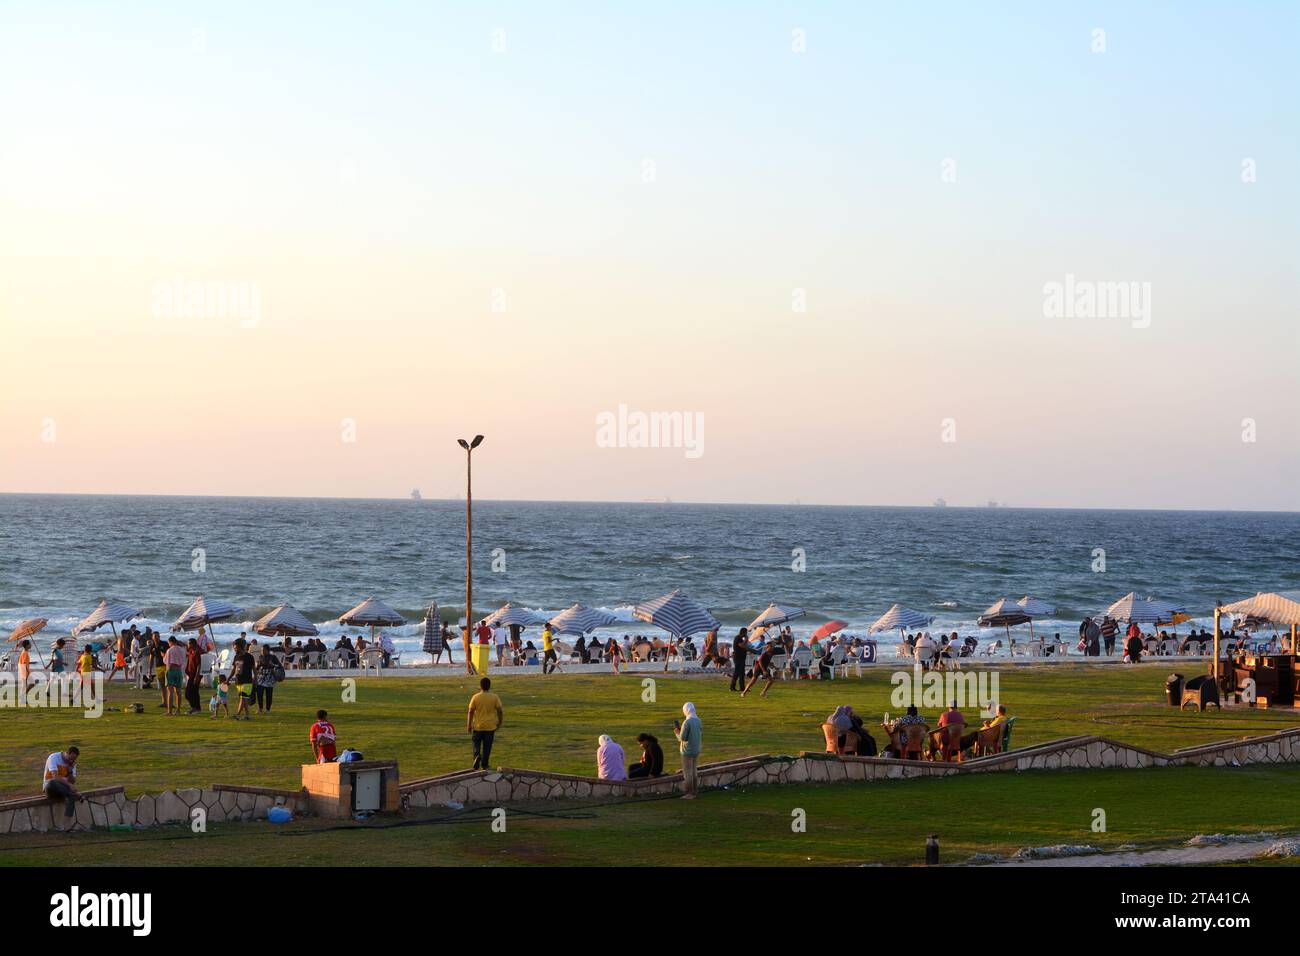 Alexandria, Egypt, September 9 2022: Alexandria beach, with people on the shore having fun and enjoying their holiday summertime, with the Mediterrane Stock Photo